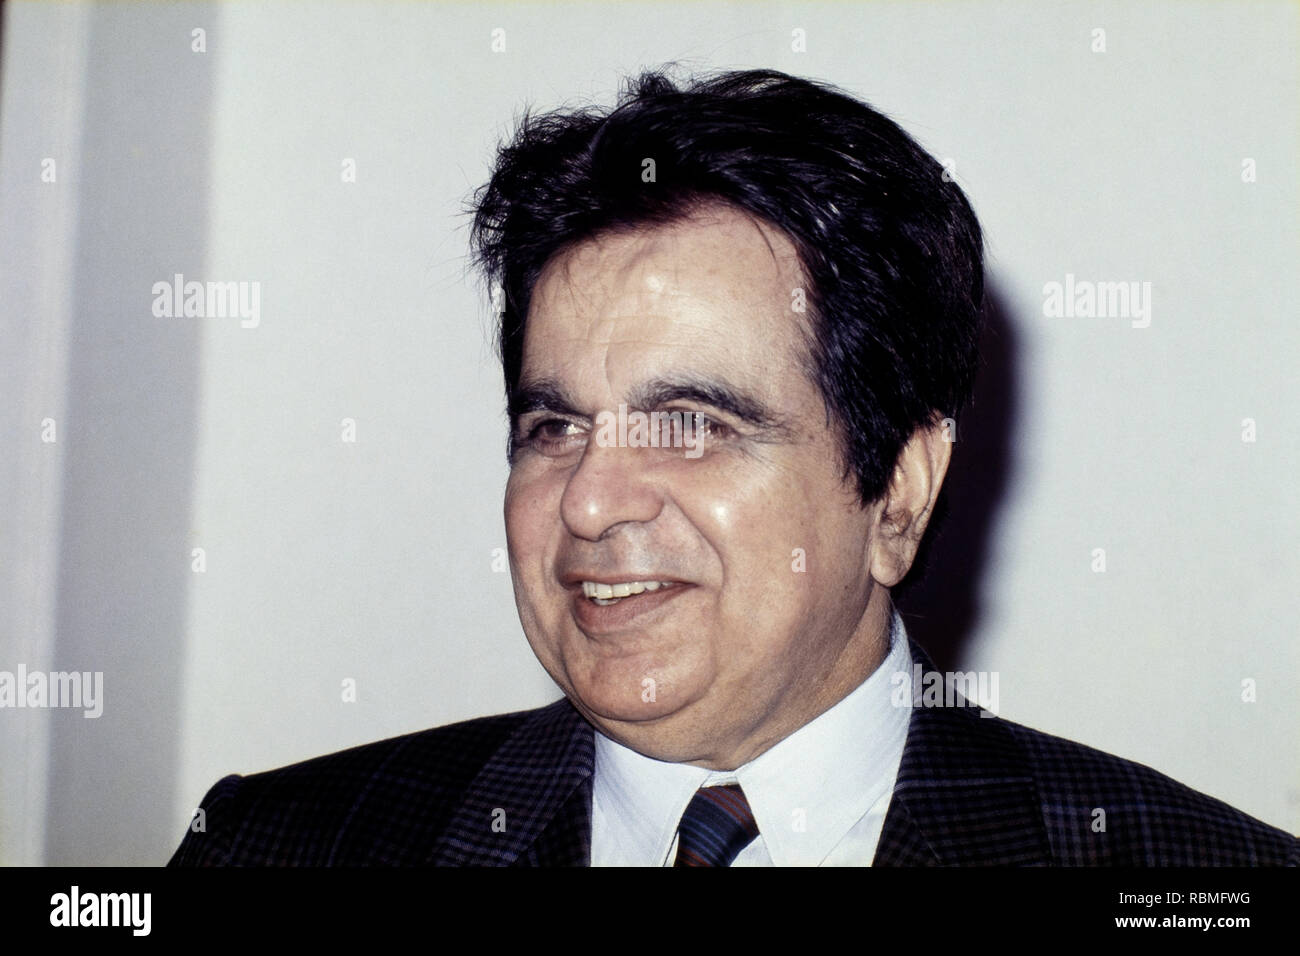 Dilip Kumar, Indian film actor, Mohammed Yusuf Khan, looking away and smiling, India, Asia Stock Photo